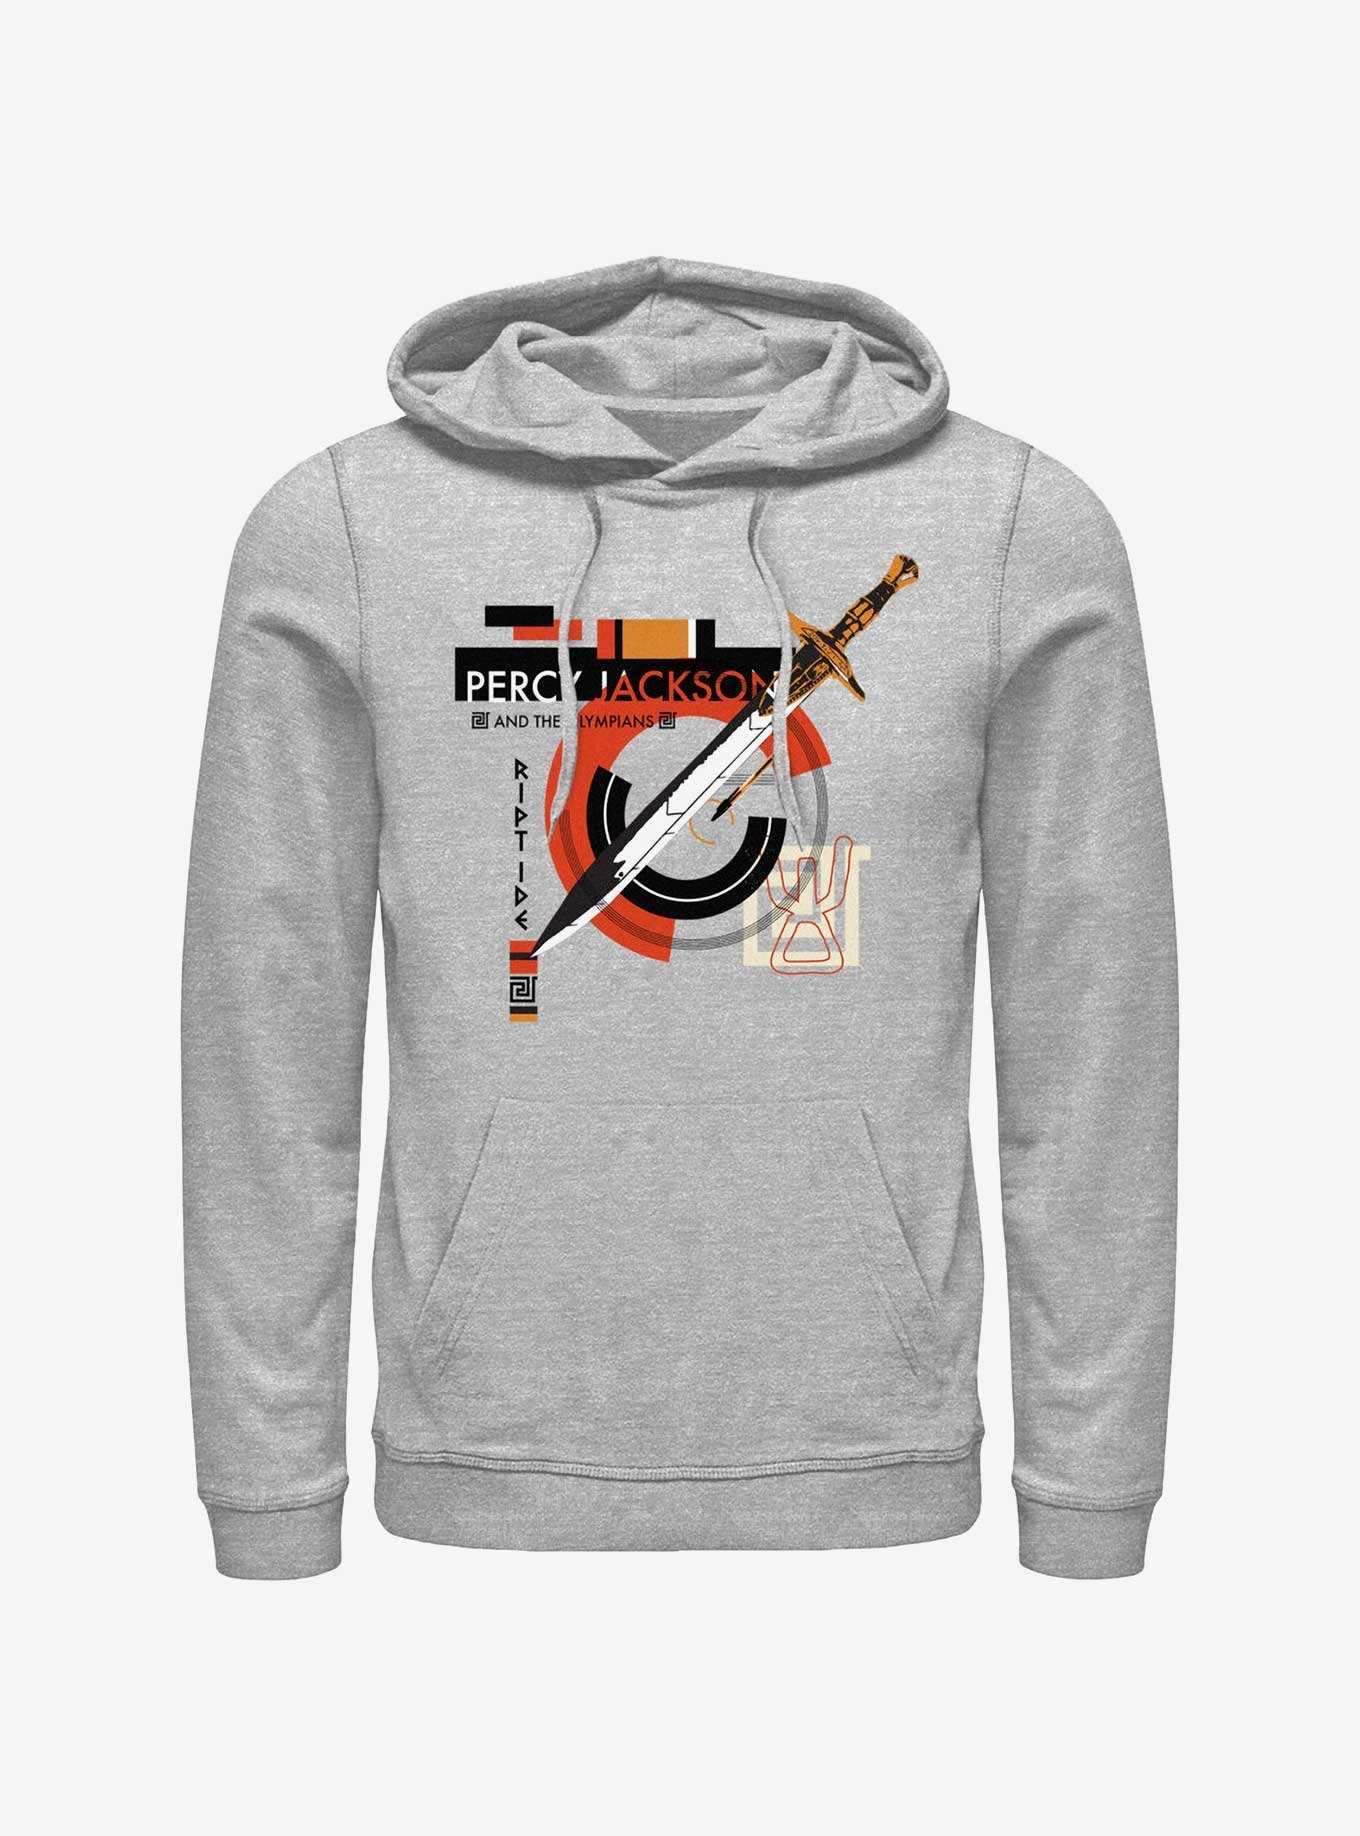 Disney Percy Jackson And The Olympians Riptide Sword Hoodie, , hi-res